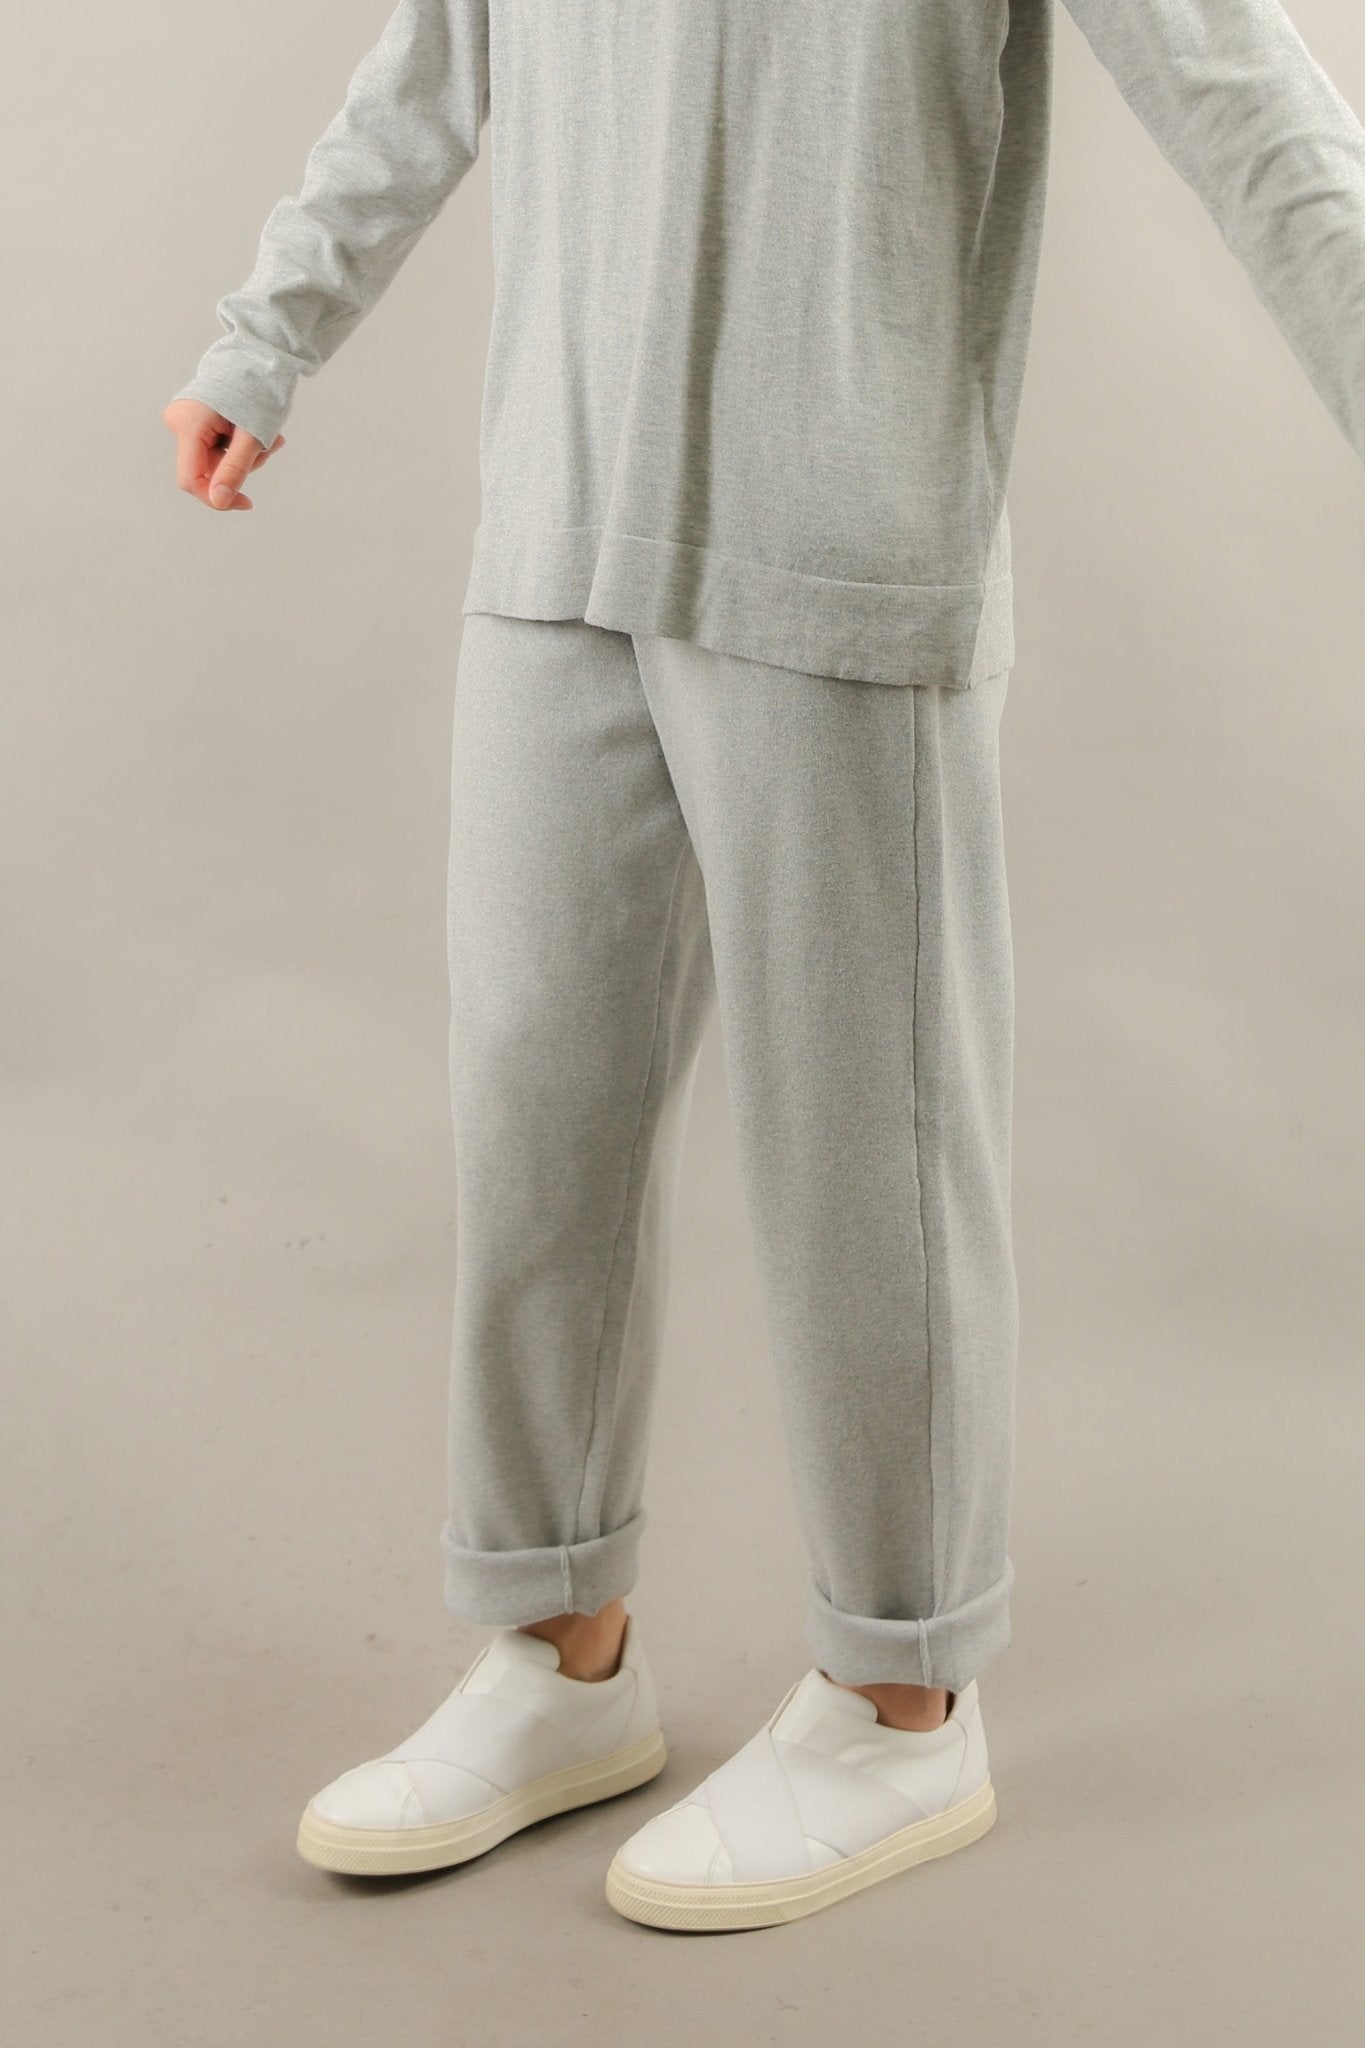 PAIGE PANT IN DOUBLE KNIT HEATHERED PIMA COTTON IN ICE GREY HEATHER - Jarbo